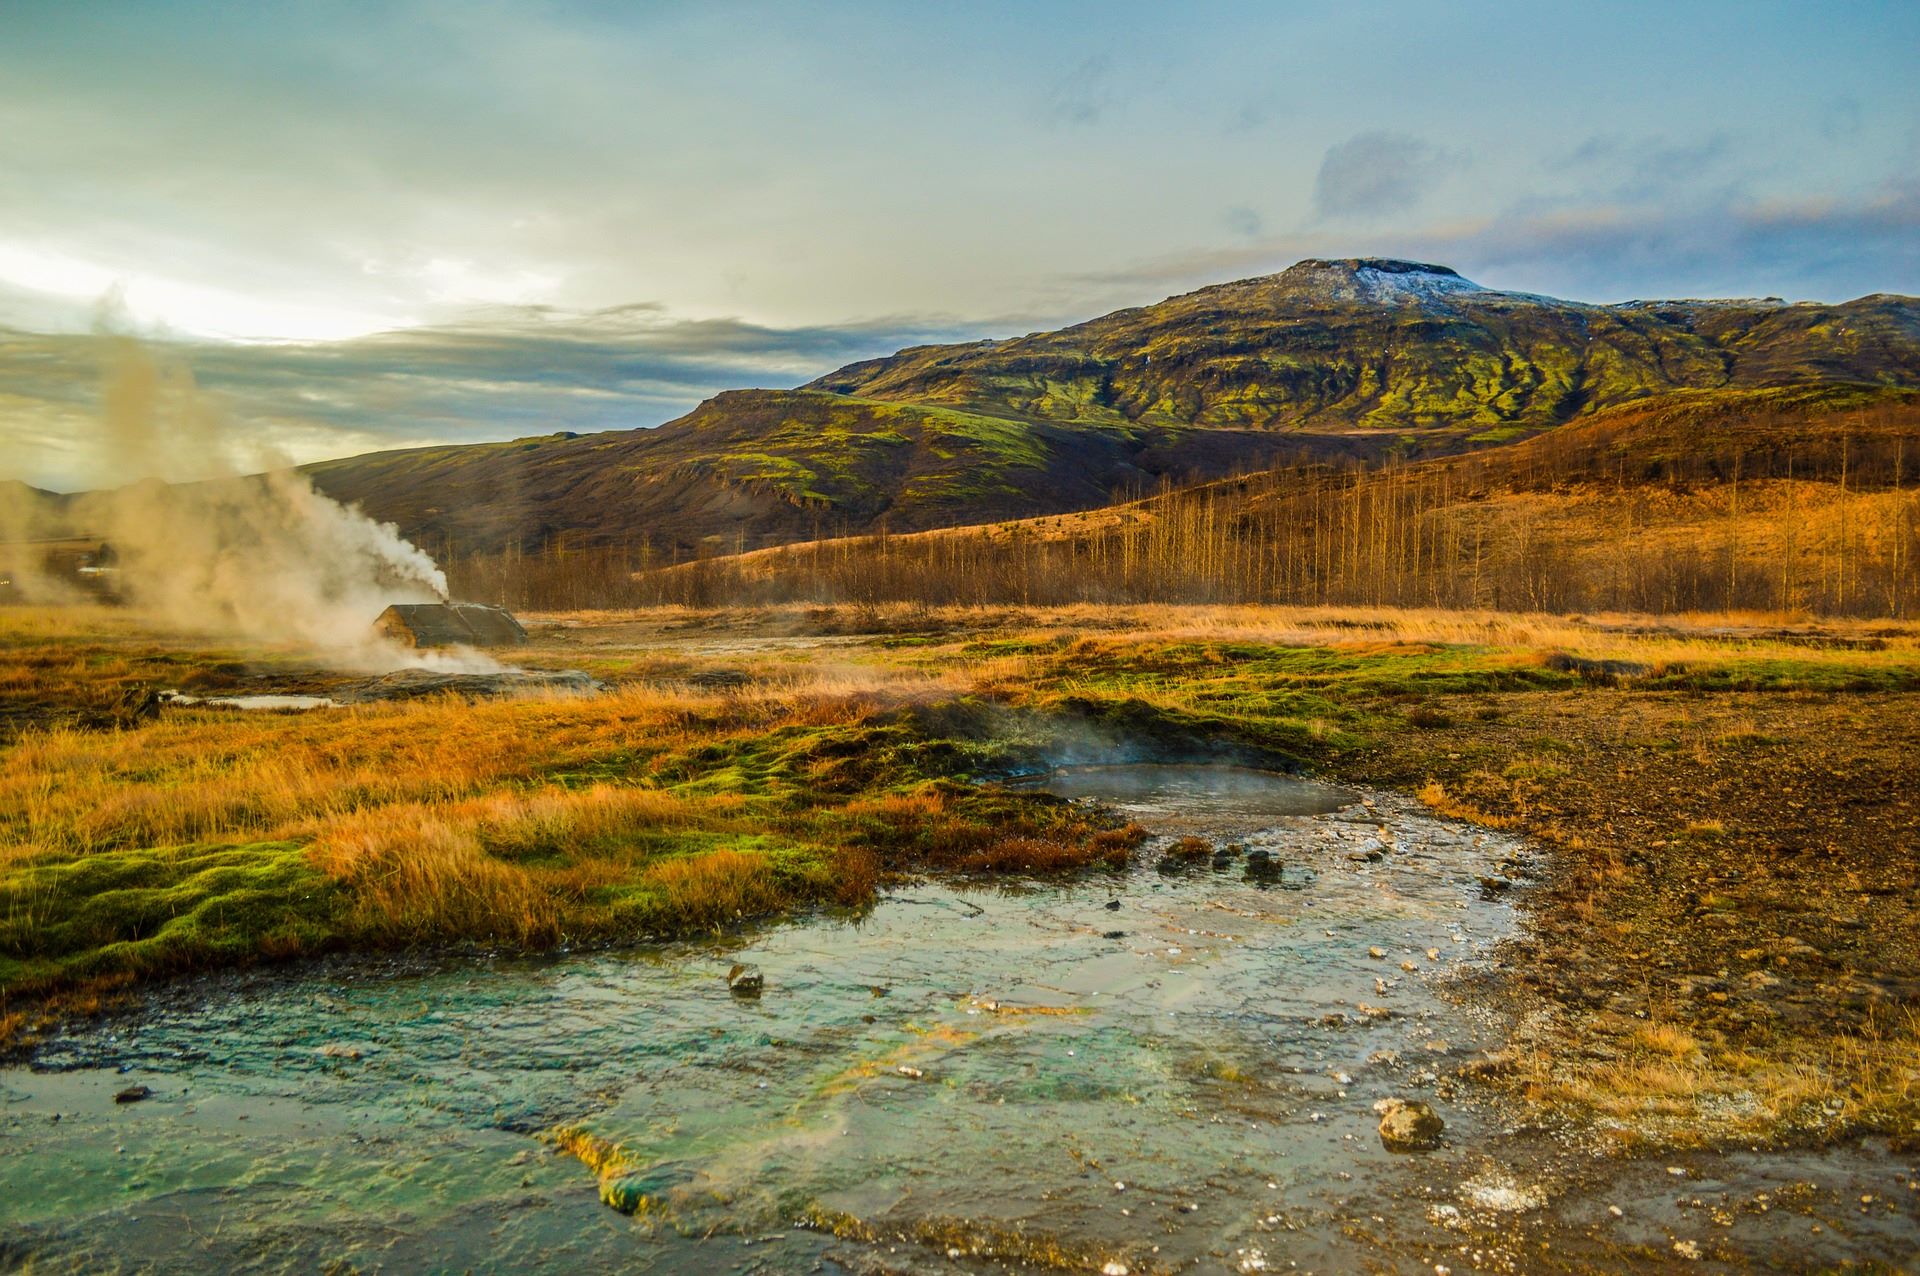 A geyser in Iceland's Golden Circle